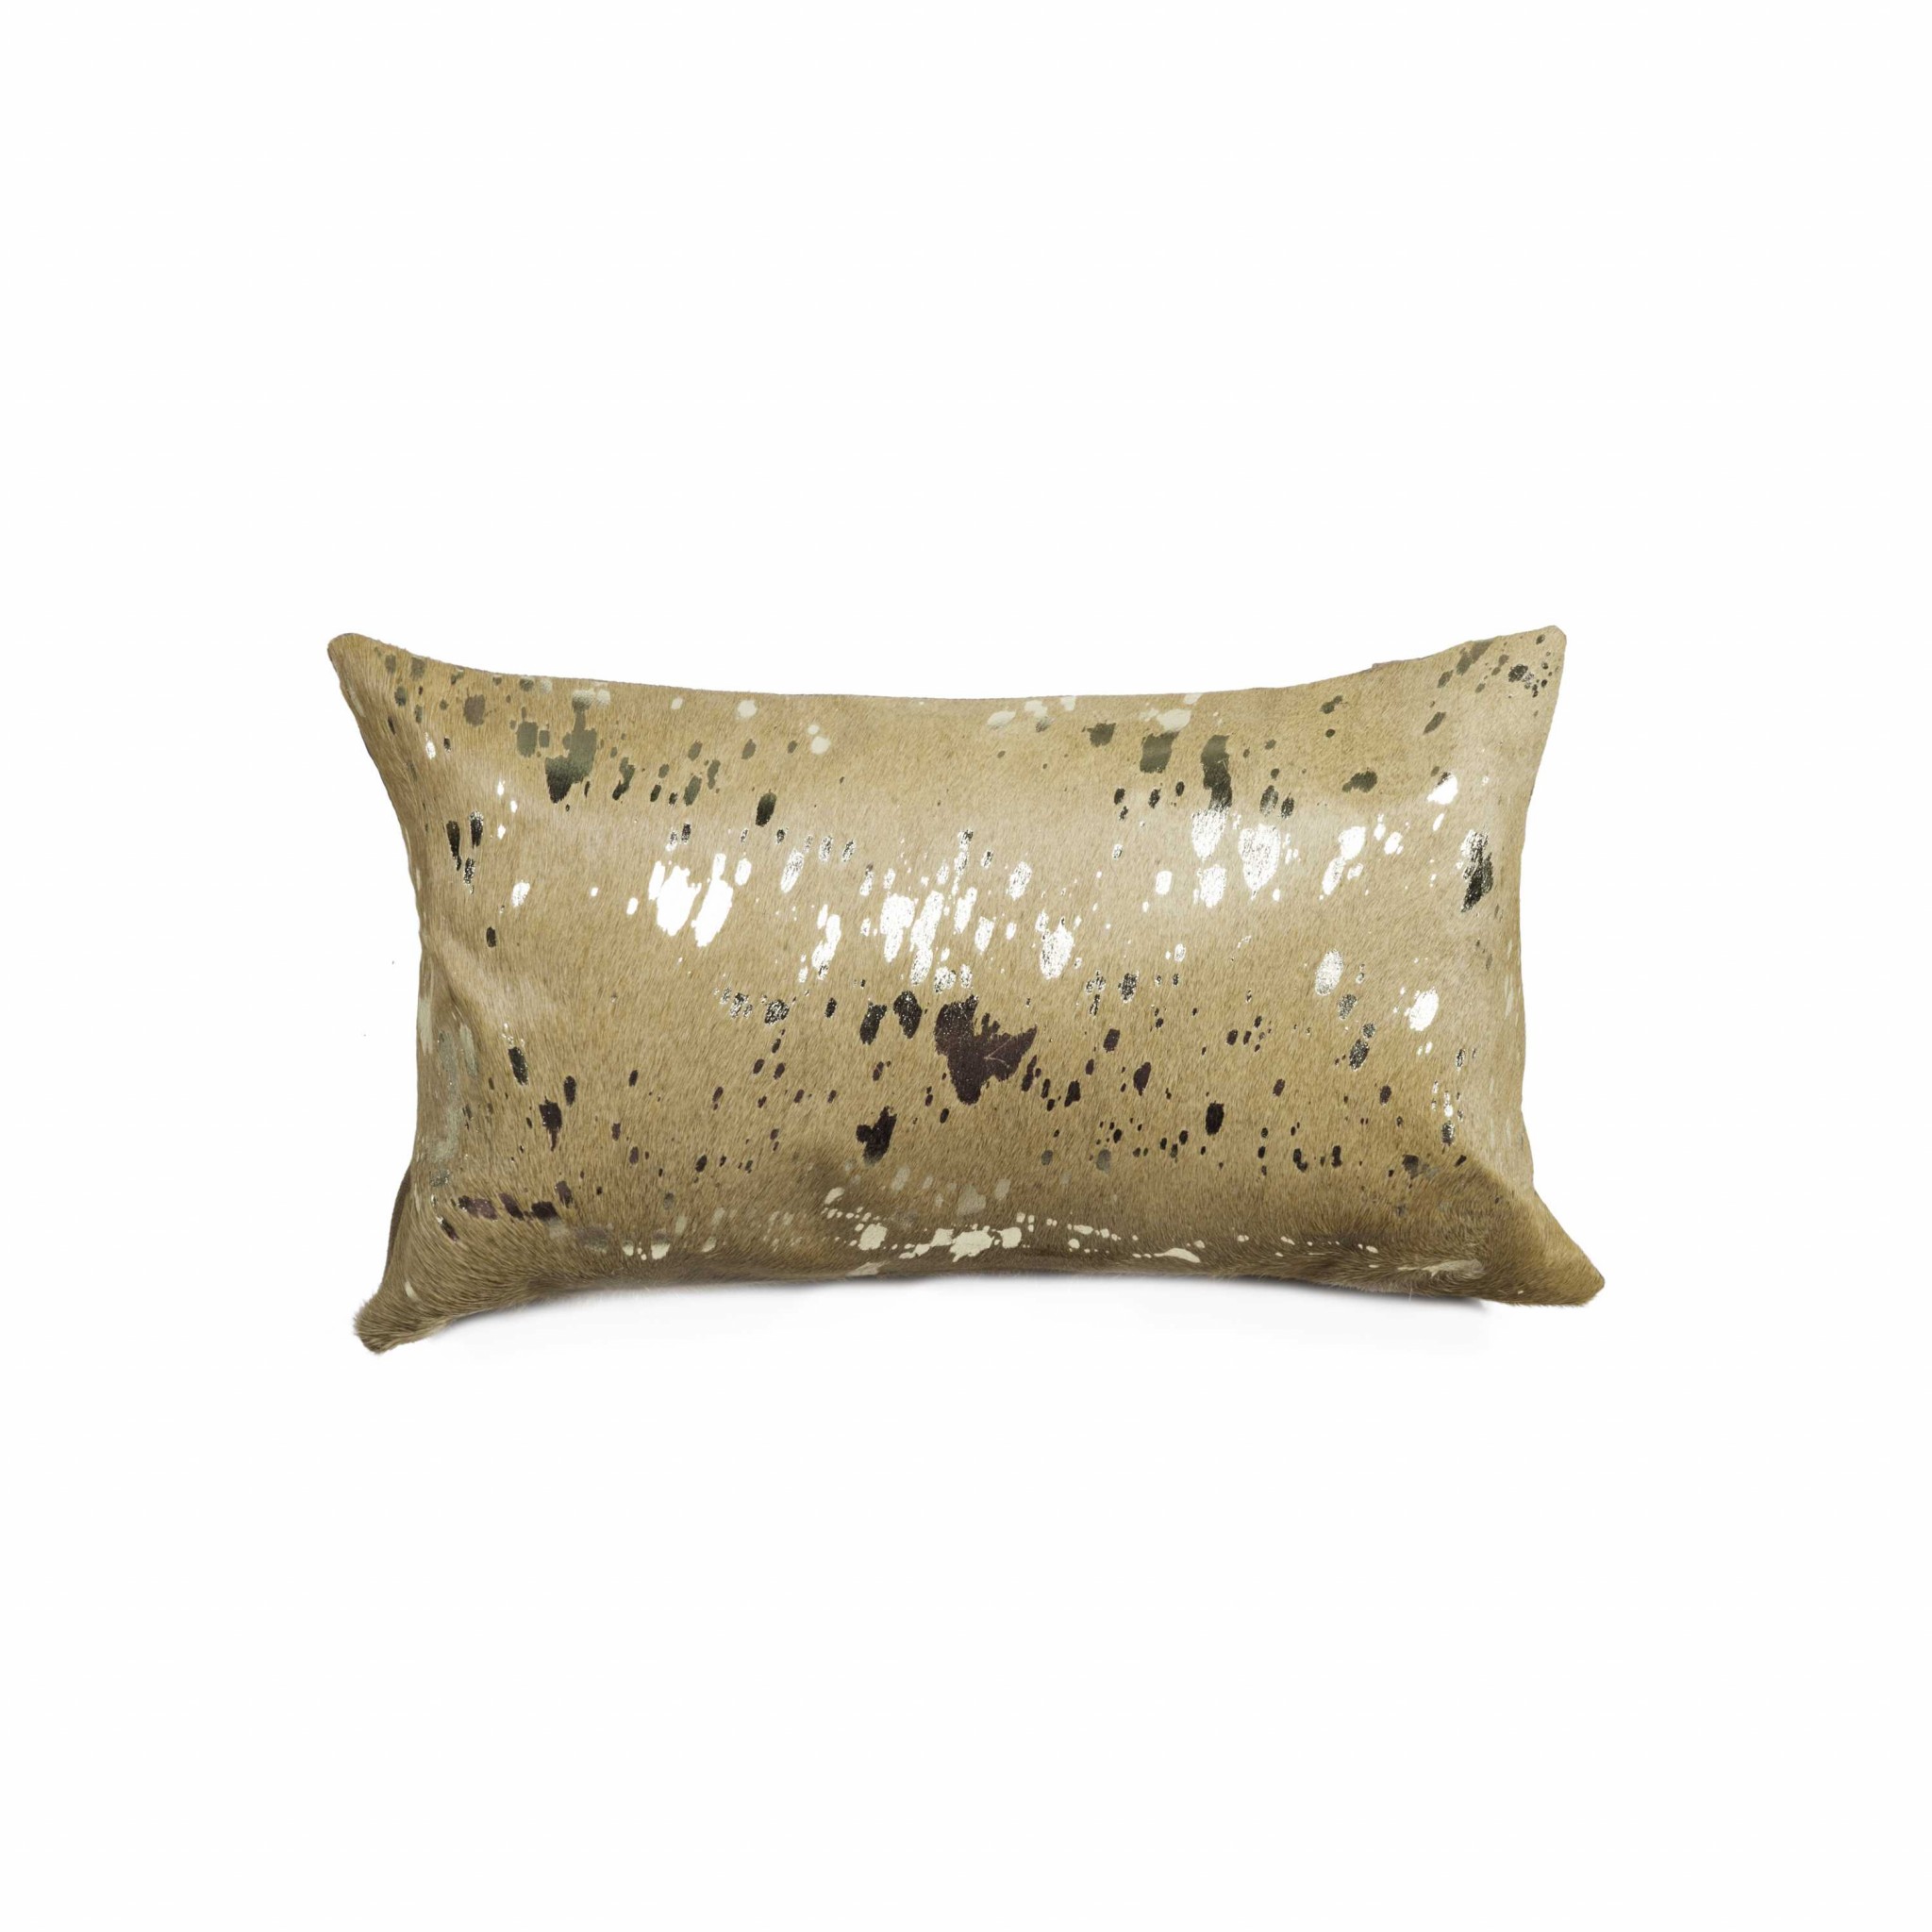 12" x 20" x 5" Gold And Tan Cowhide - Pillow